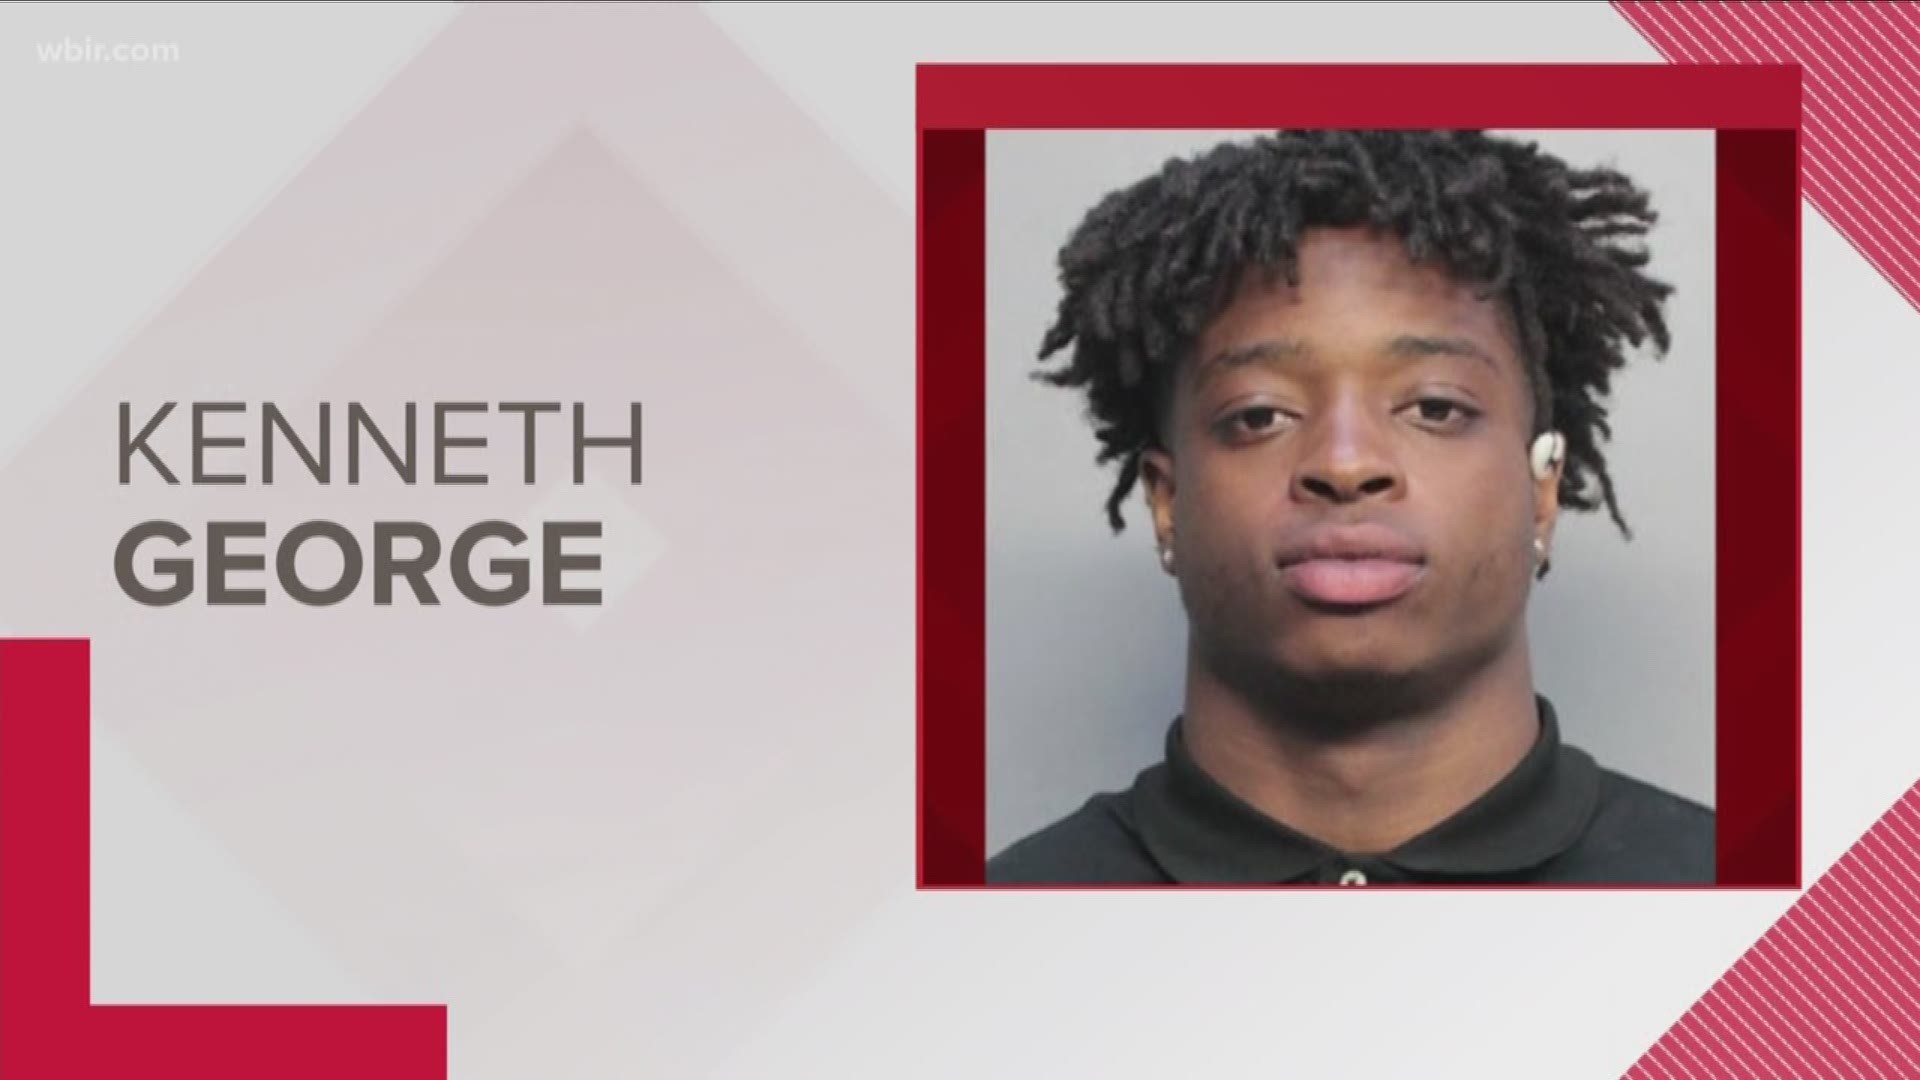 a University of Tennessee football player is facing charges in Florida after an altercation with a police officer.